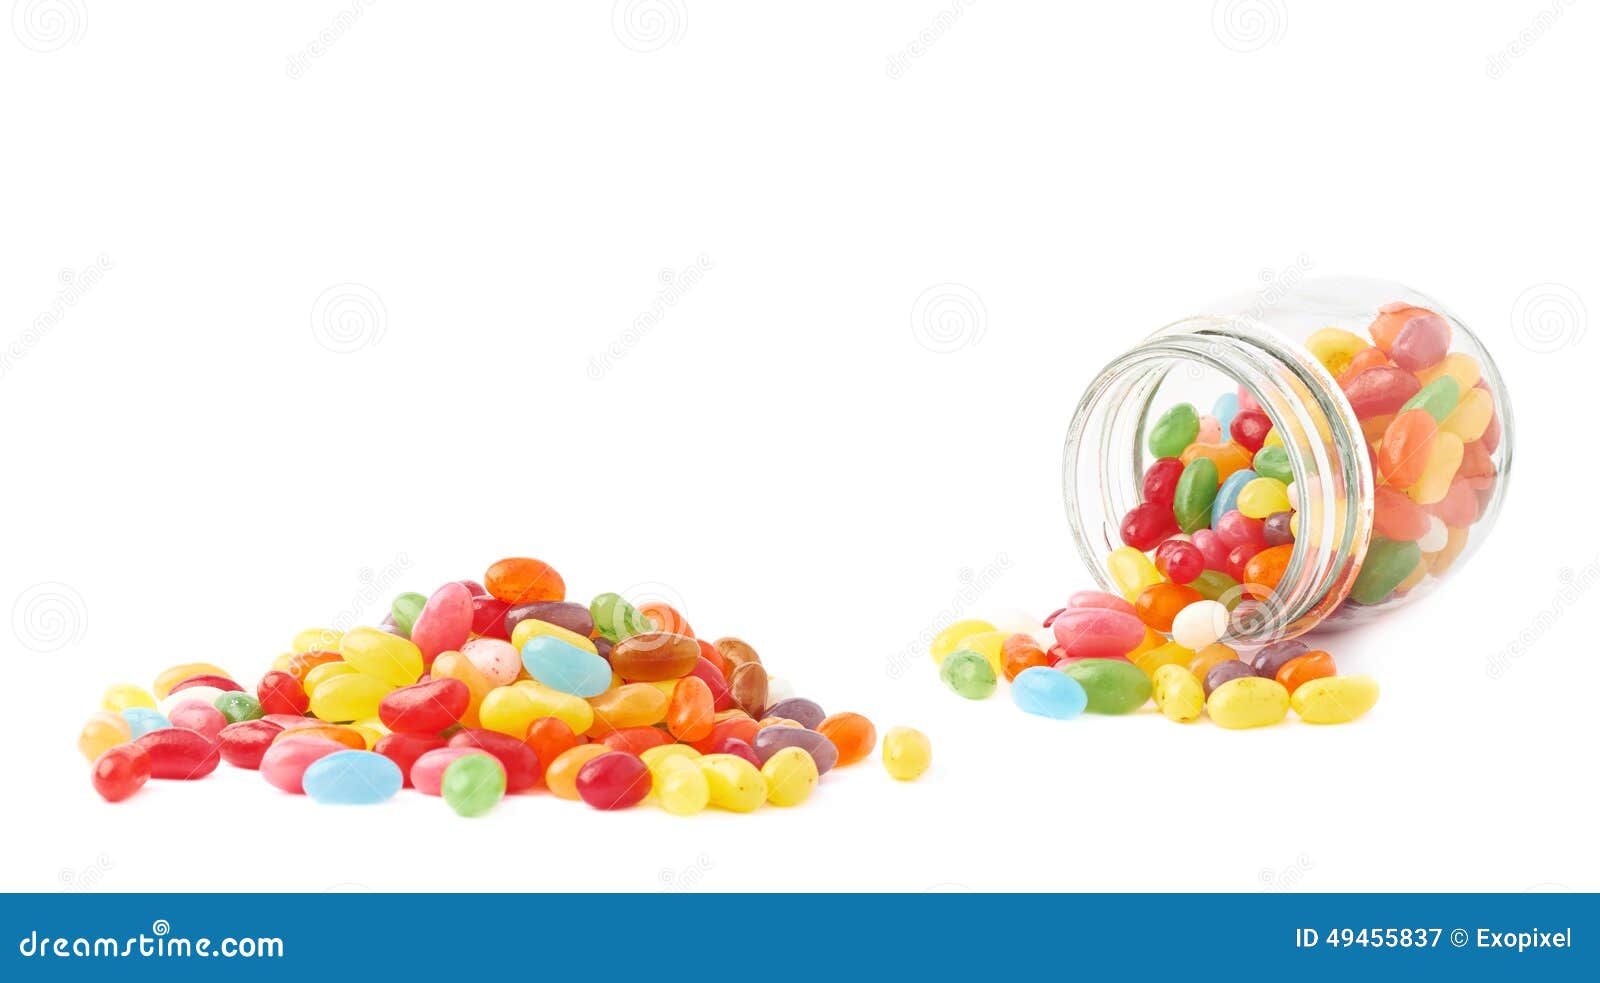 Composition of a Jar and Jelly Beans Stock Image - Image of delicious ...